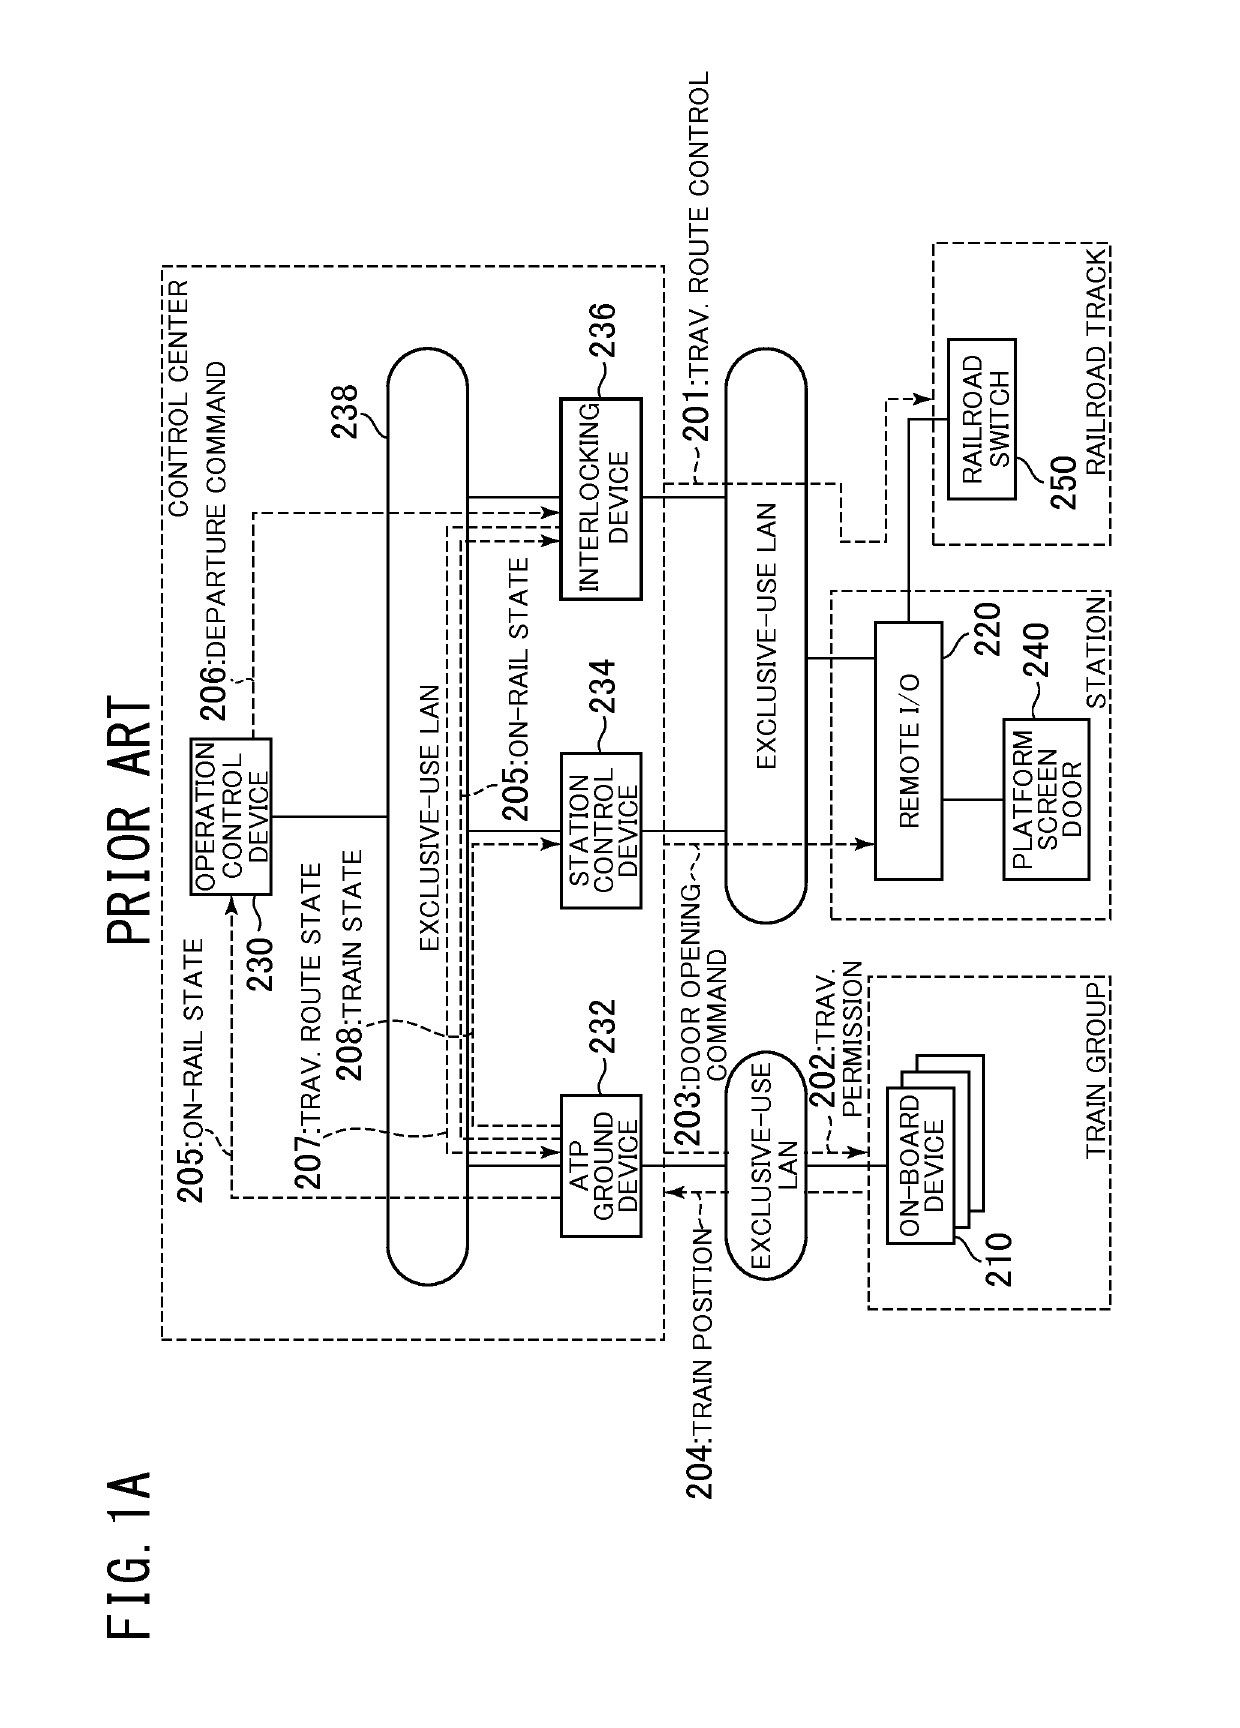 On-board device, signaling system, and control method of moving vehicle